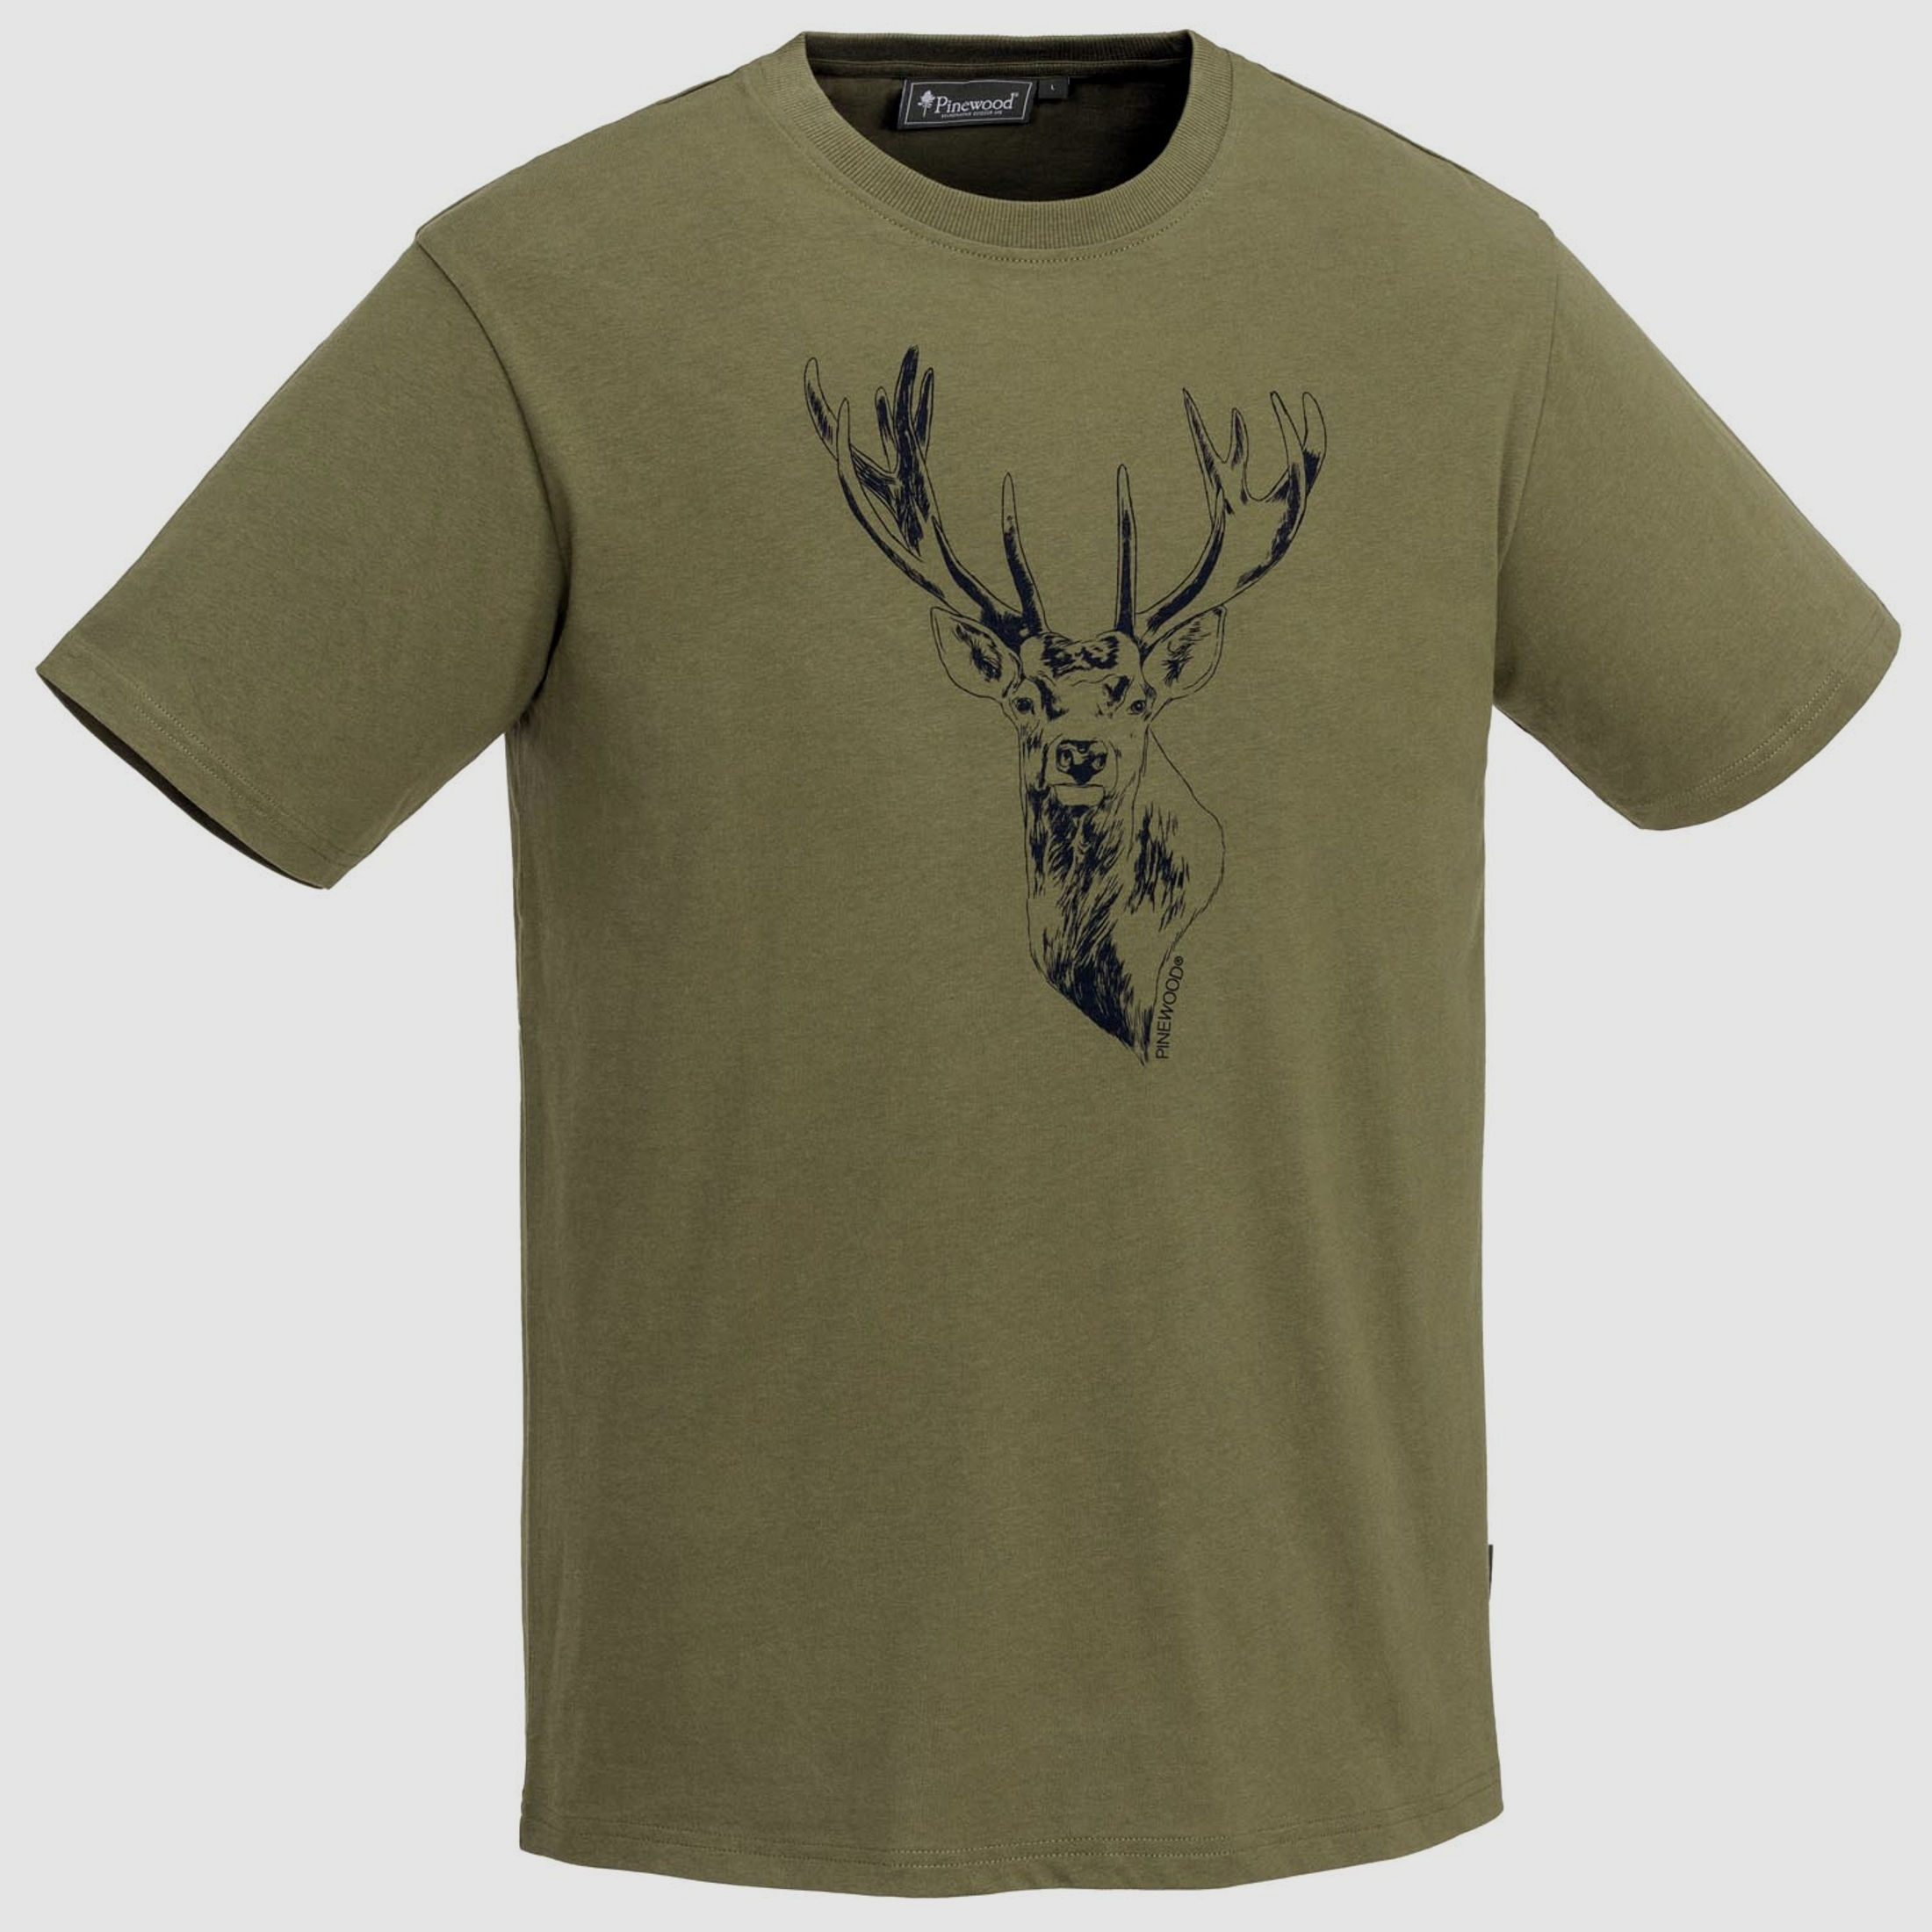 Pinewood T-Shirt Red Deer  H.Olive